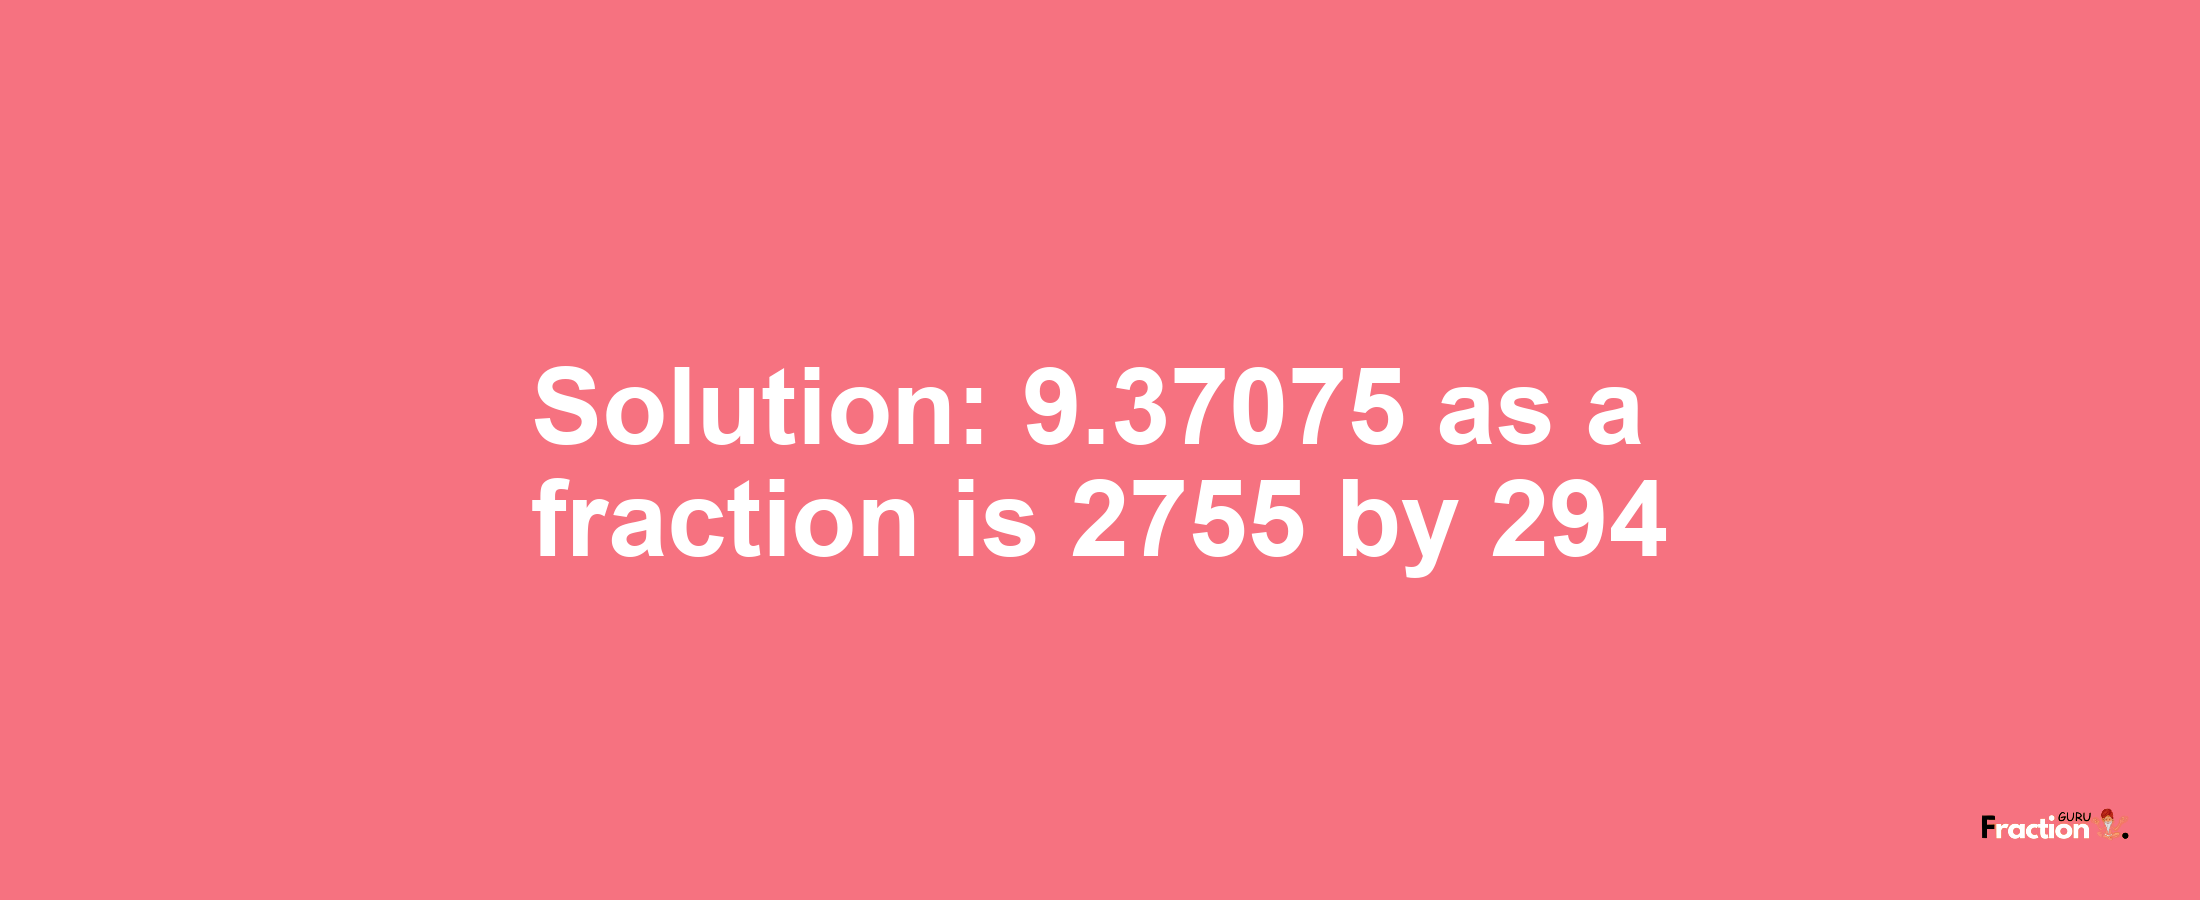 Solution:9.37075 as a fraction is 2755/294